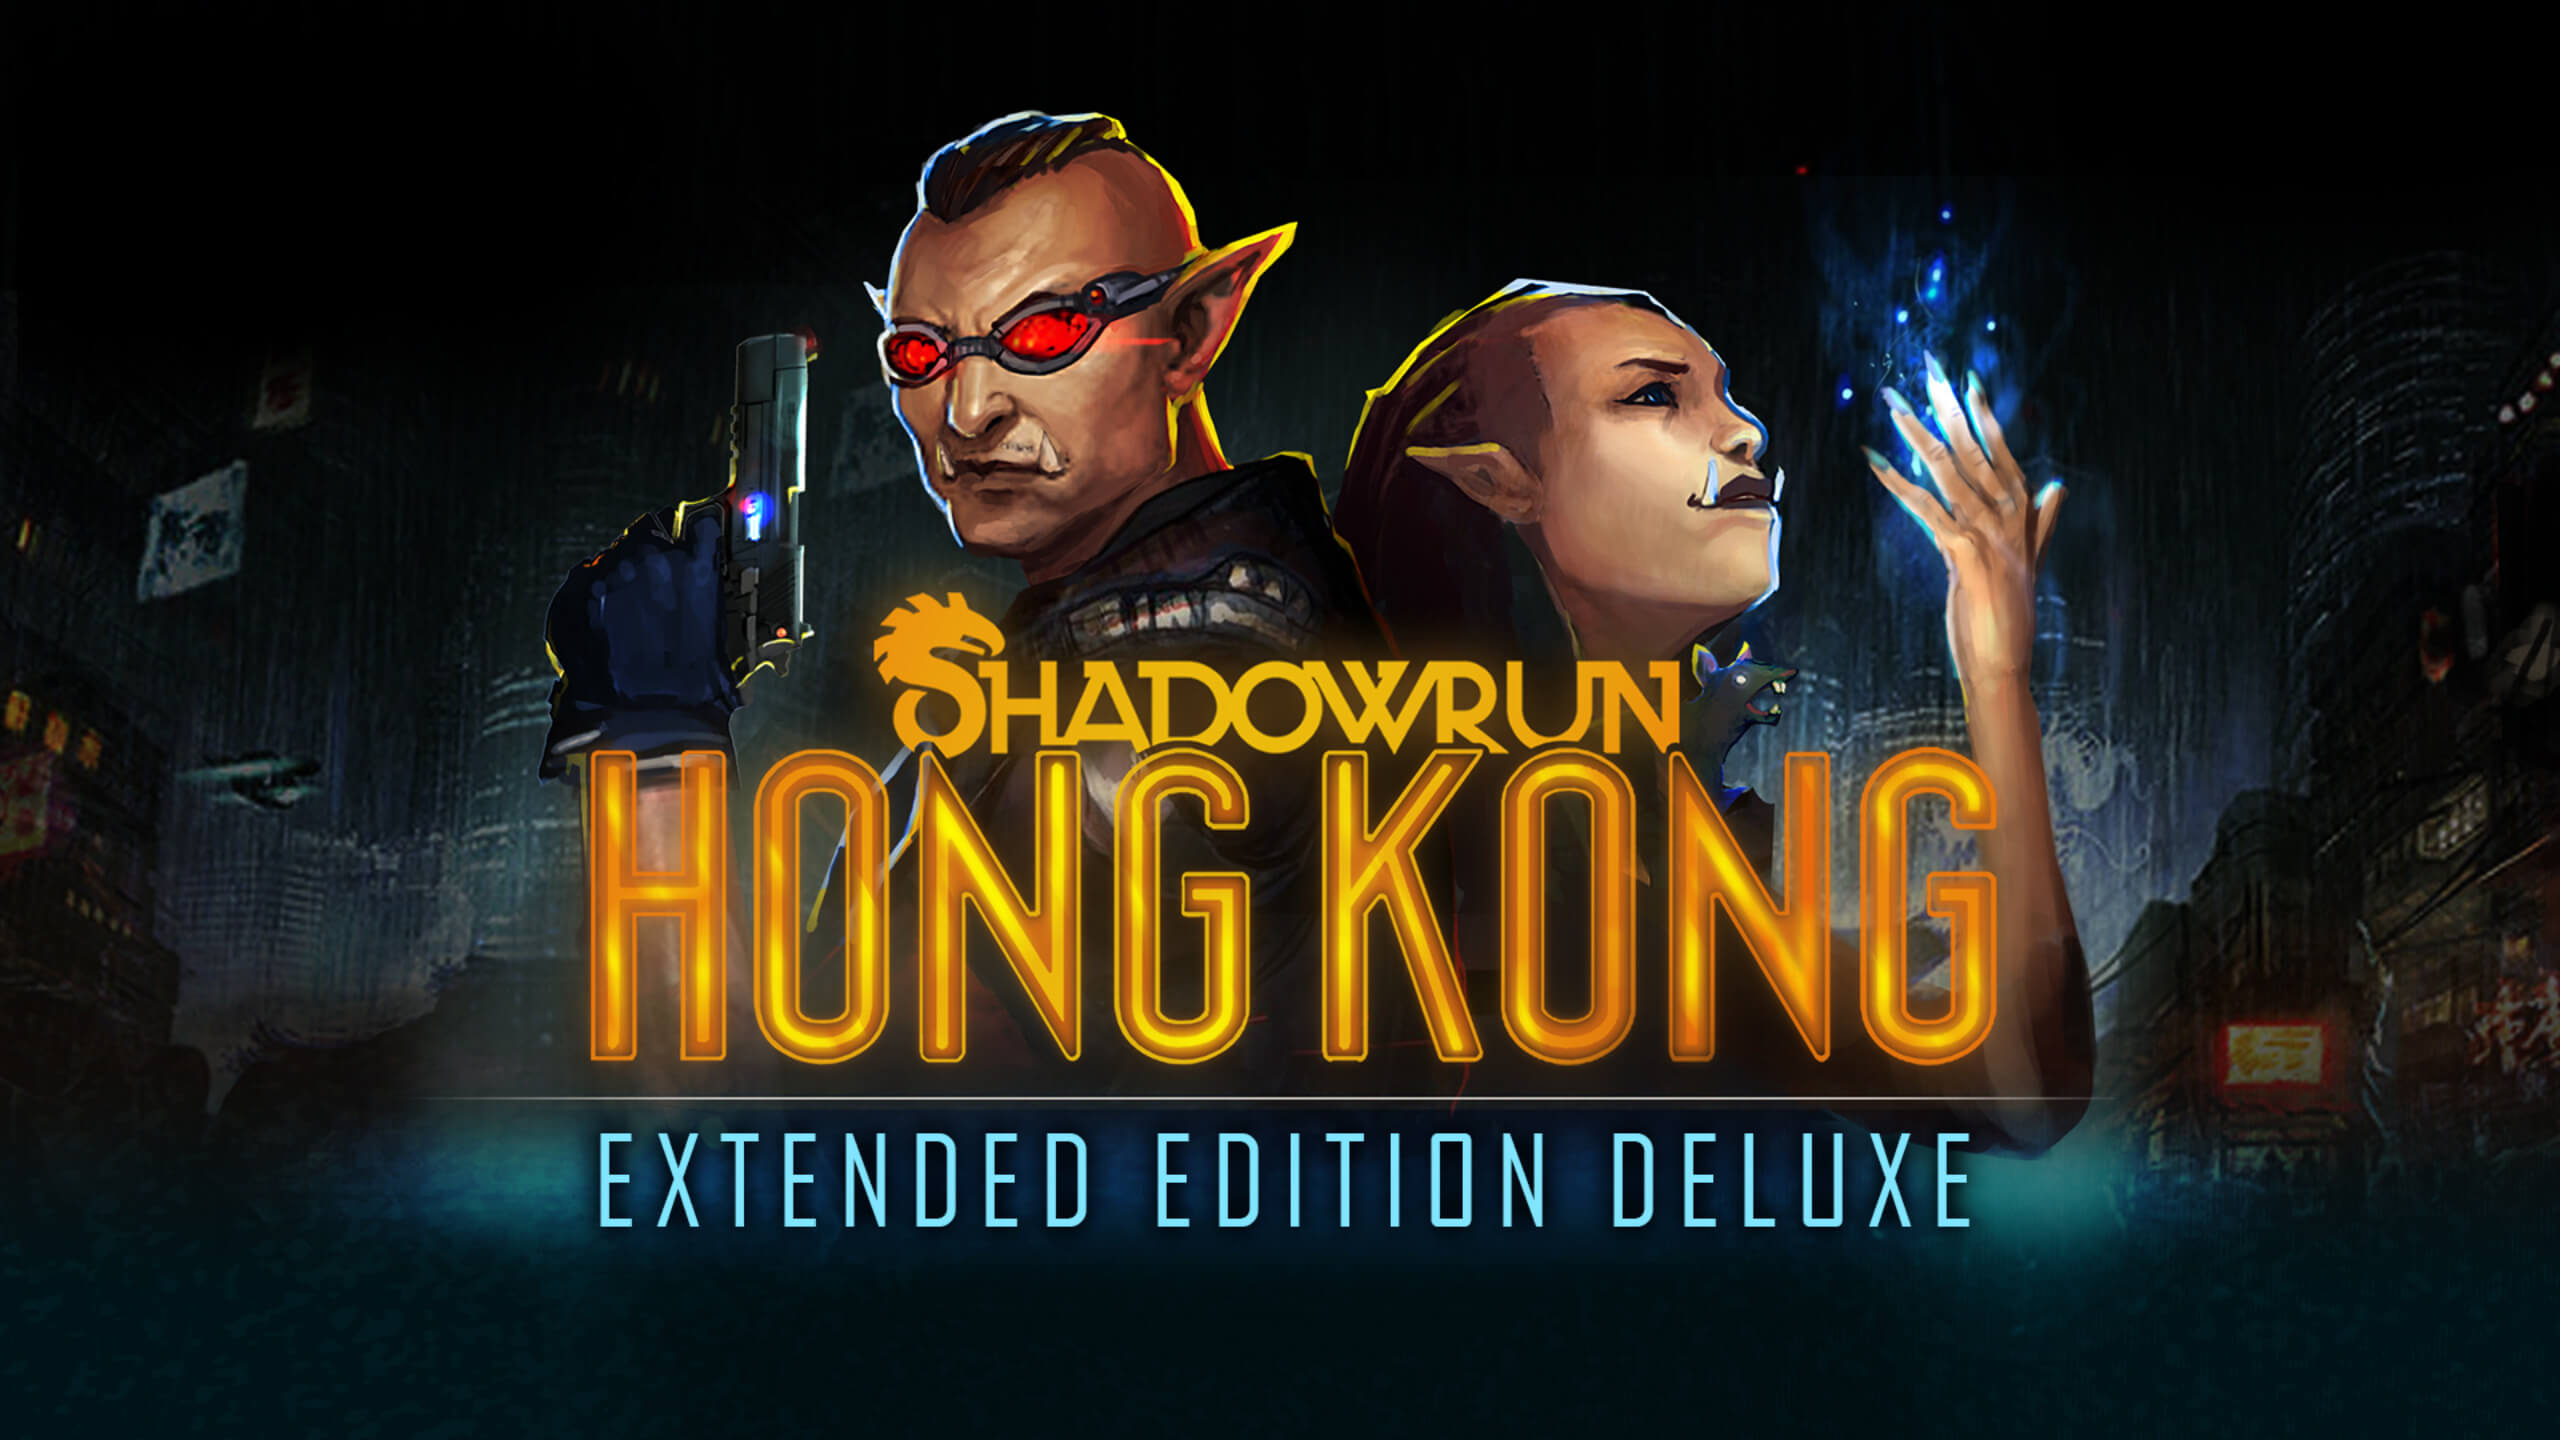 Shadowrun: Hong Kong – Extended Edition free full pc game for download